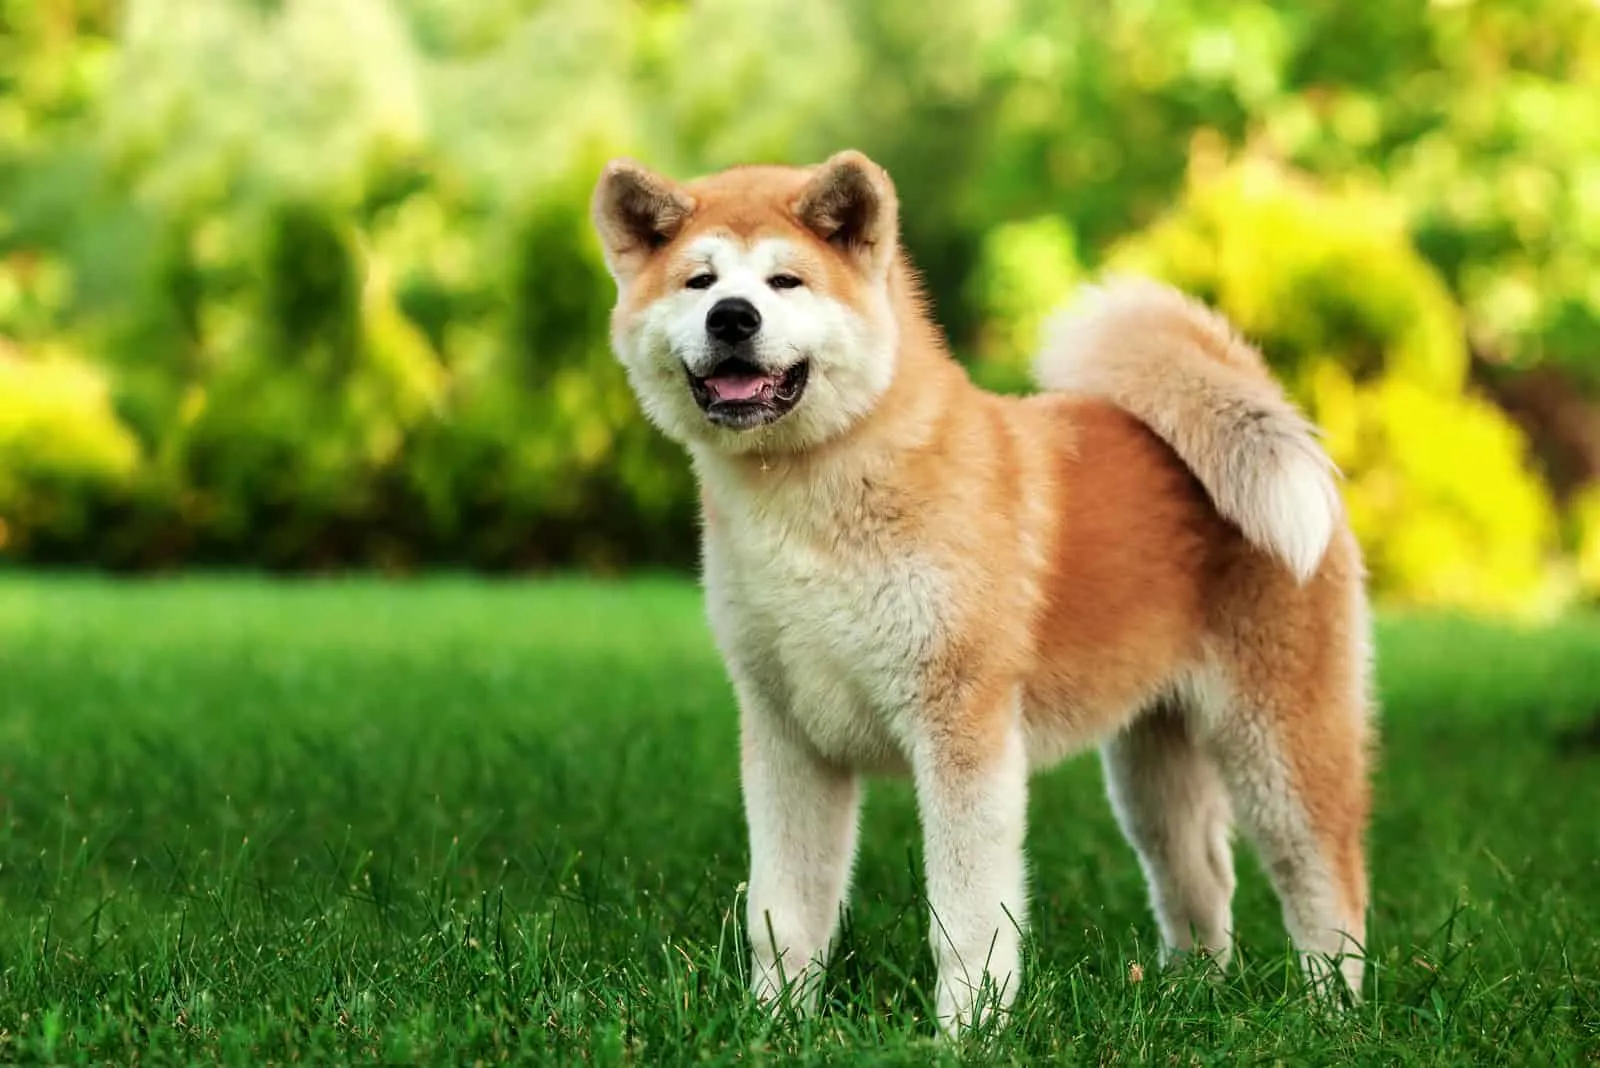 akita inu with long white and red fluffy coat